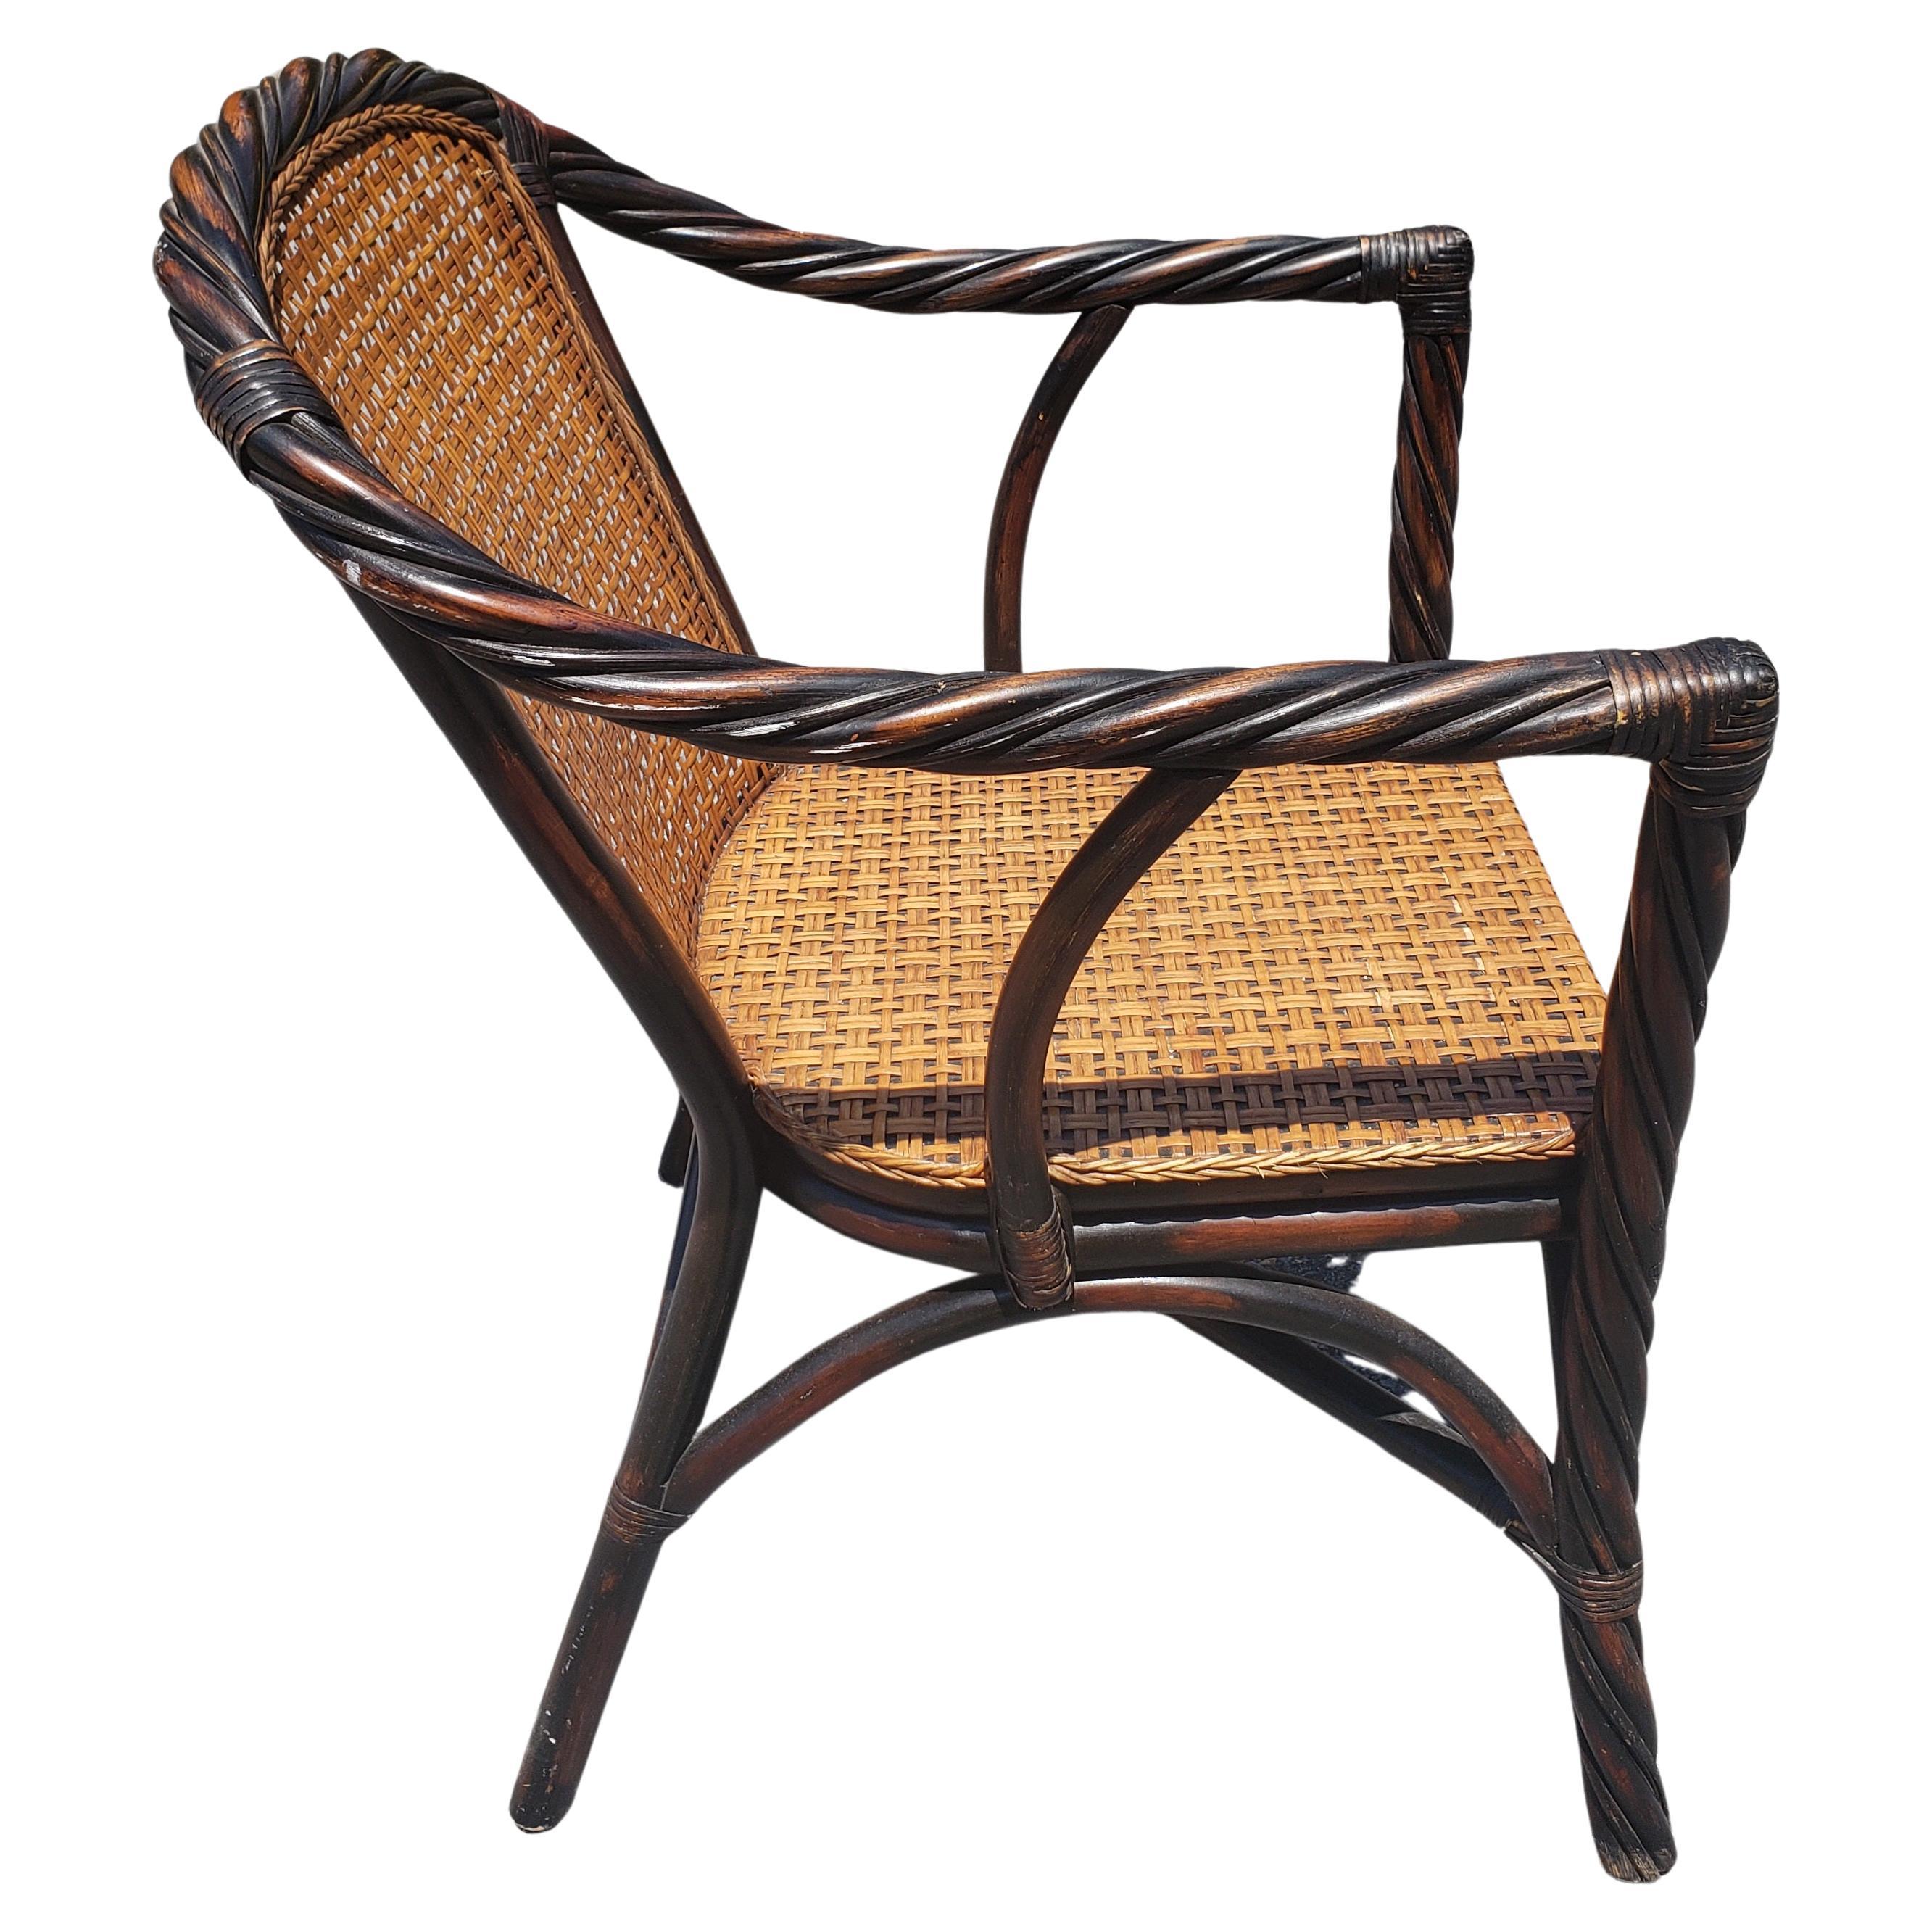 Vintage Barley Twist Ebonized Faux rattan and wicker seat and back armchair in very good vintage condition. Very solid woven wicker over wood seat and back. Very nicely ebonized with patina. Measures arm height is 27.5